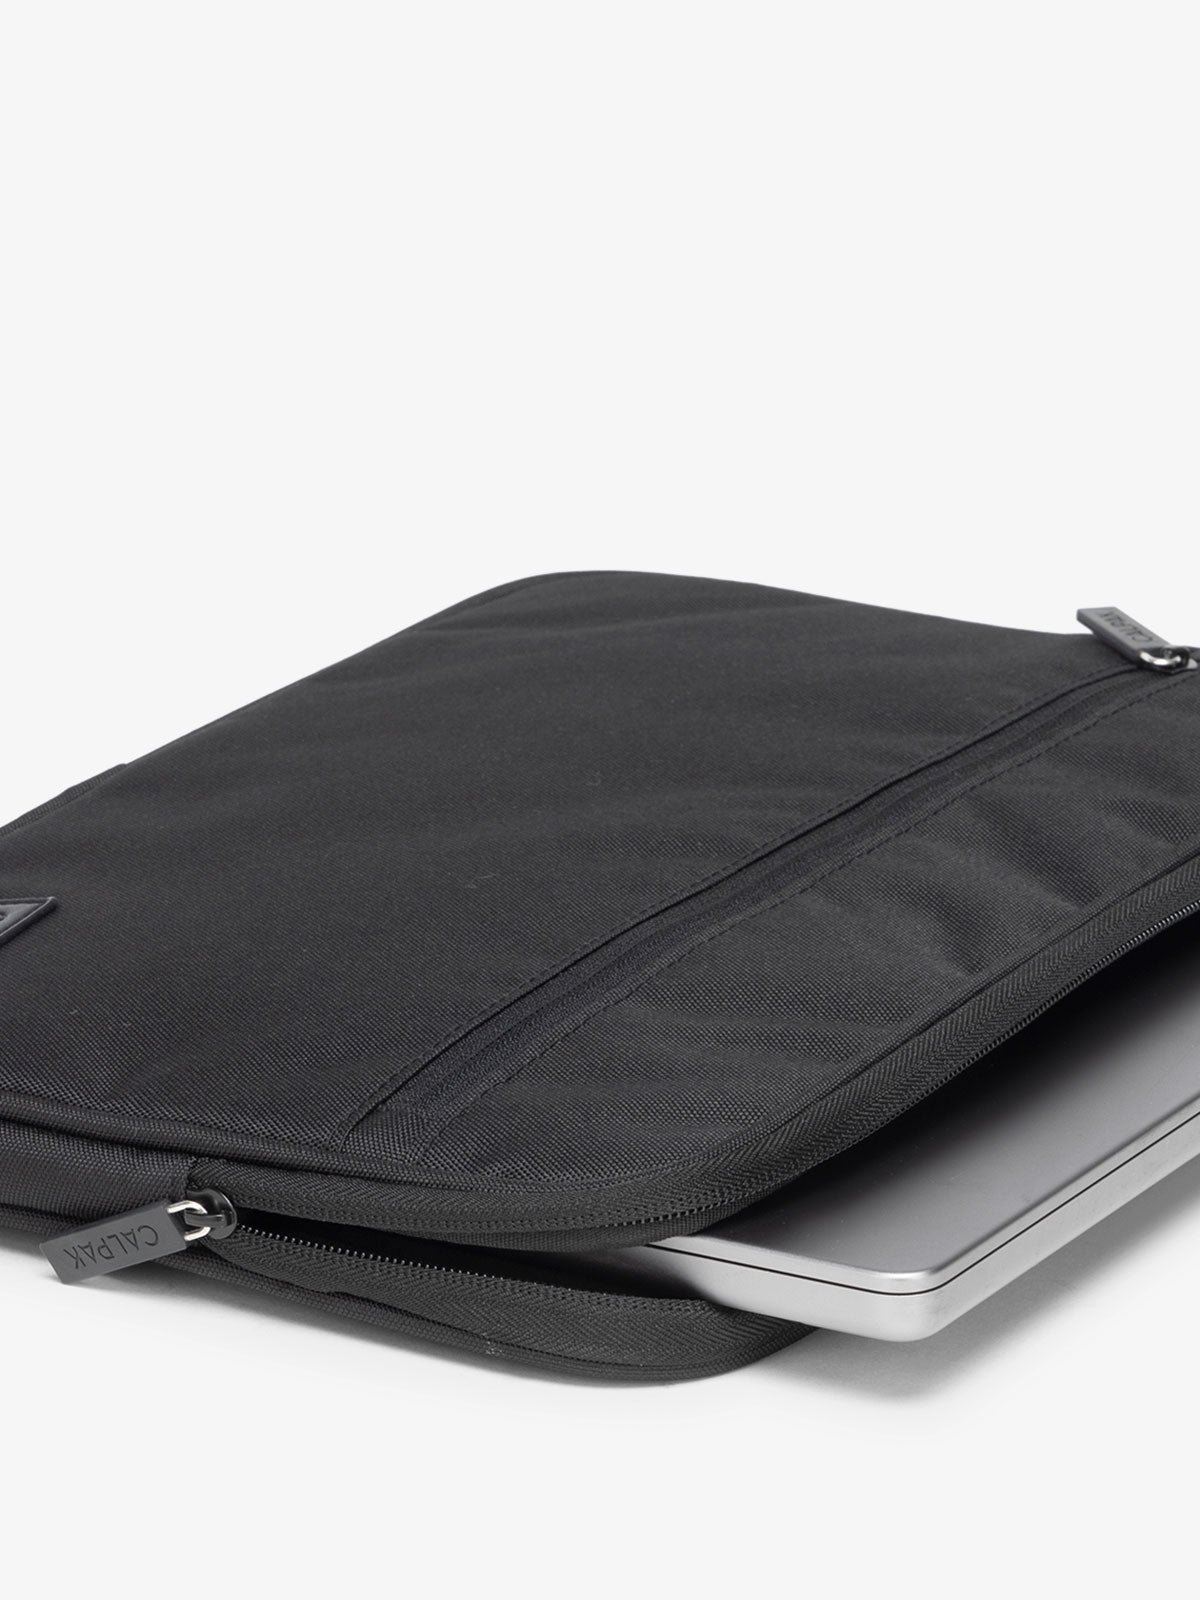 CALPAK 13-14 Inch Travel Laptop Cover for with protective pockets in black